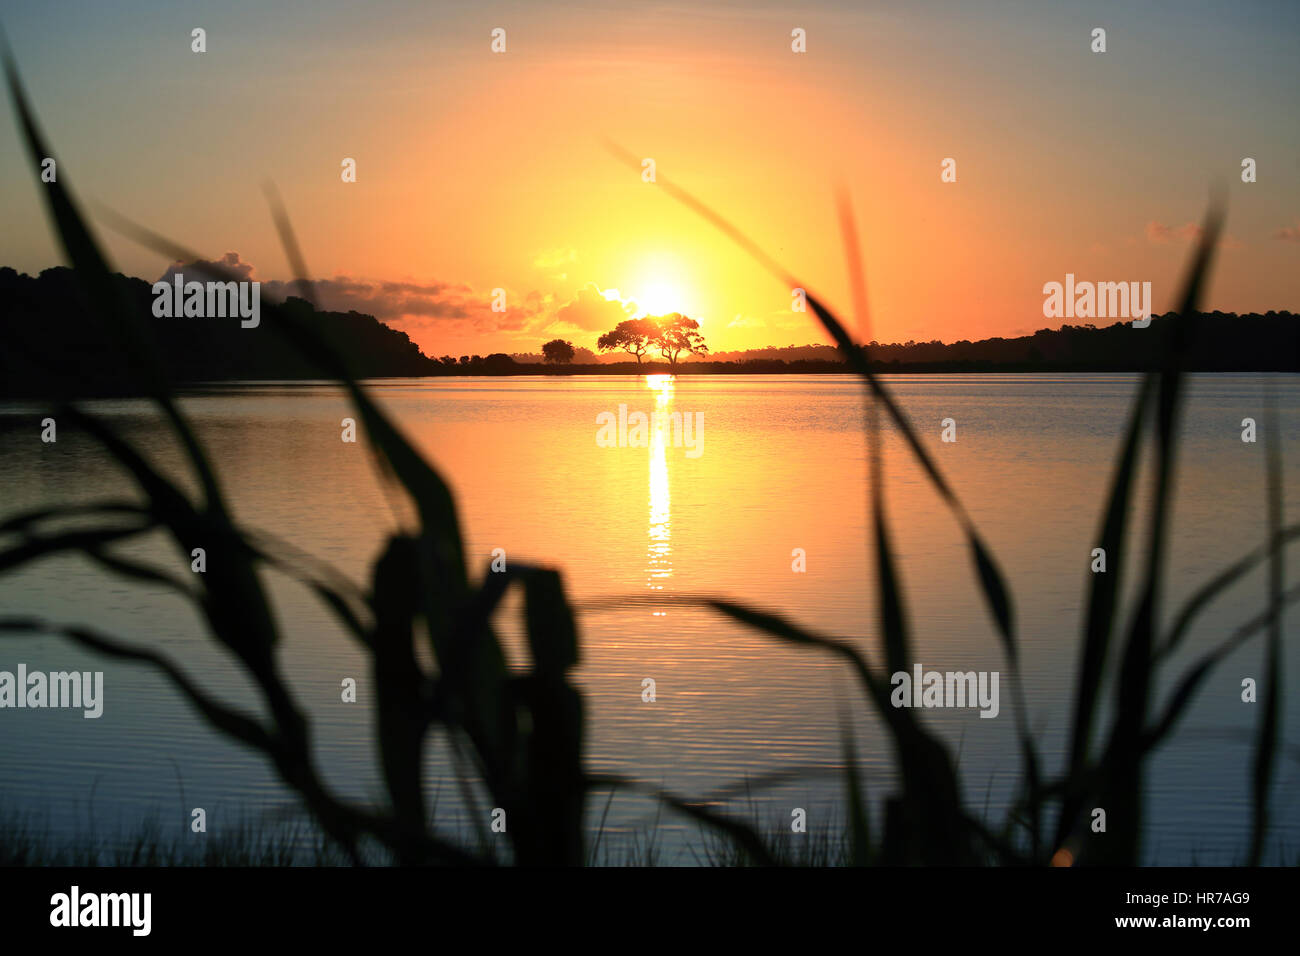 A Live Oak tree is silhouetted against the rising sun on Kiawah Island, South Carolina. The sun is reflected in the pond and creates a colorful sky. Stock Photo